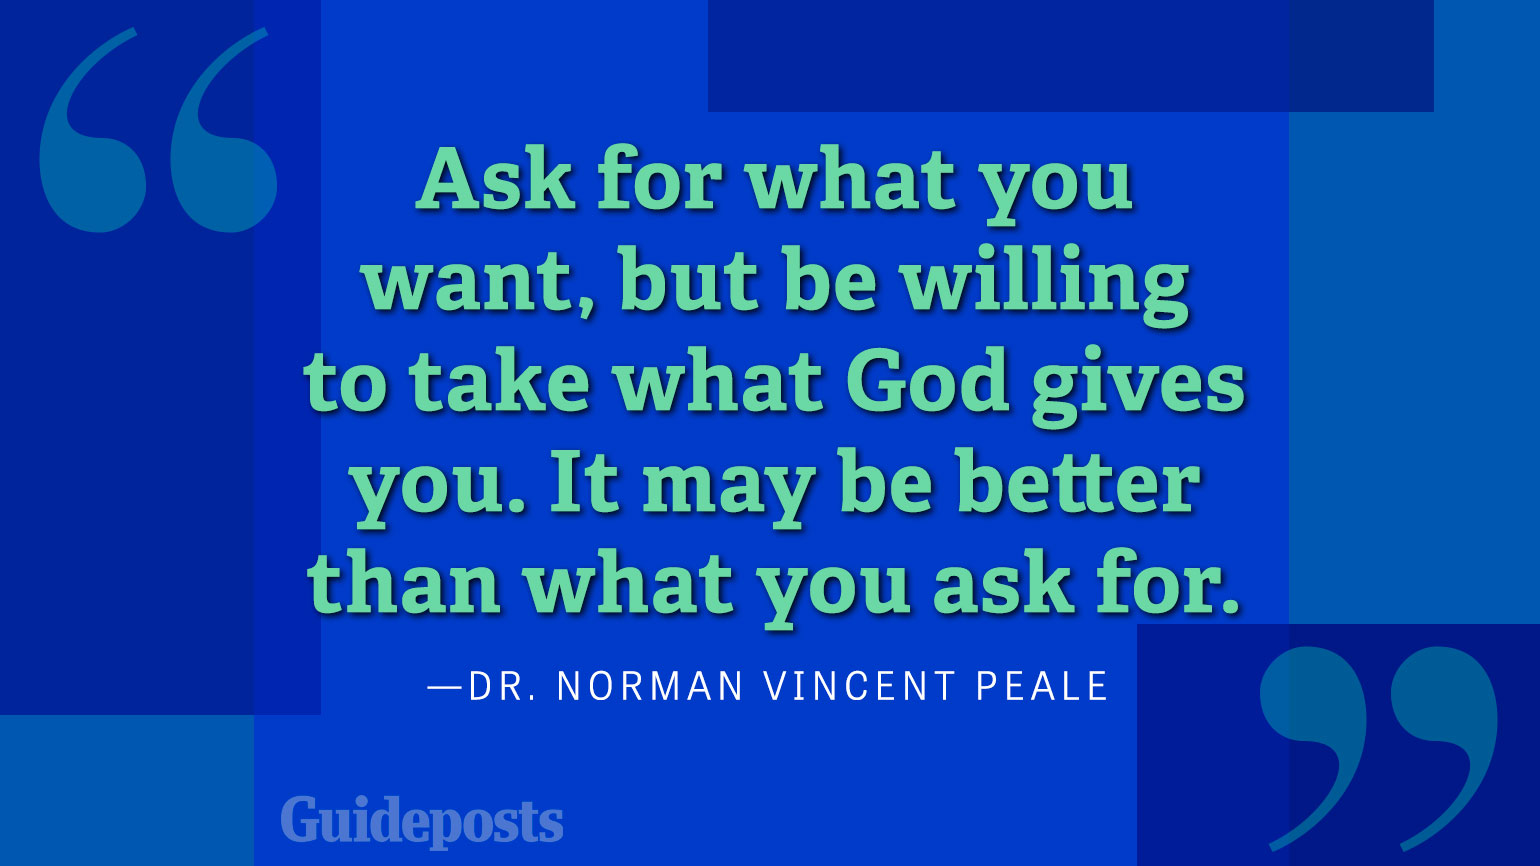 Ask for what you want, but be willing to take what God gives you. It may be better than what you ask for.